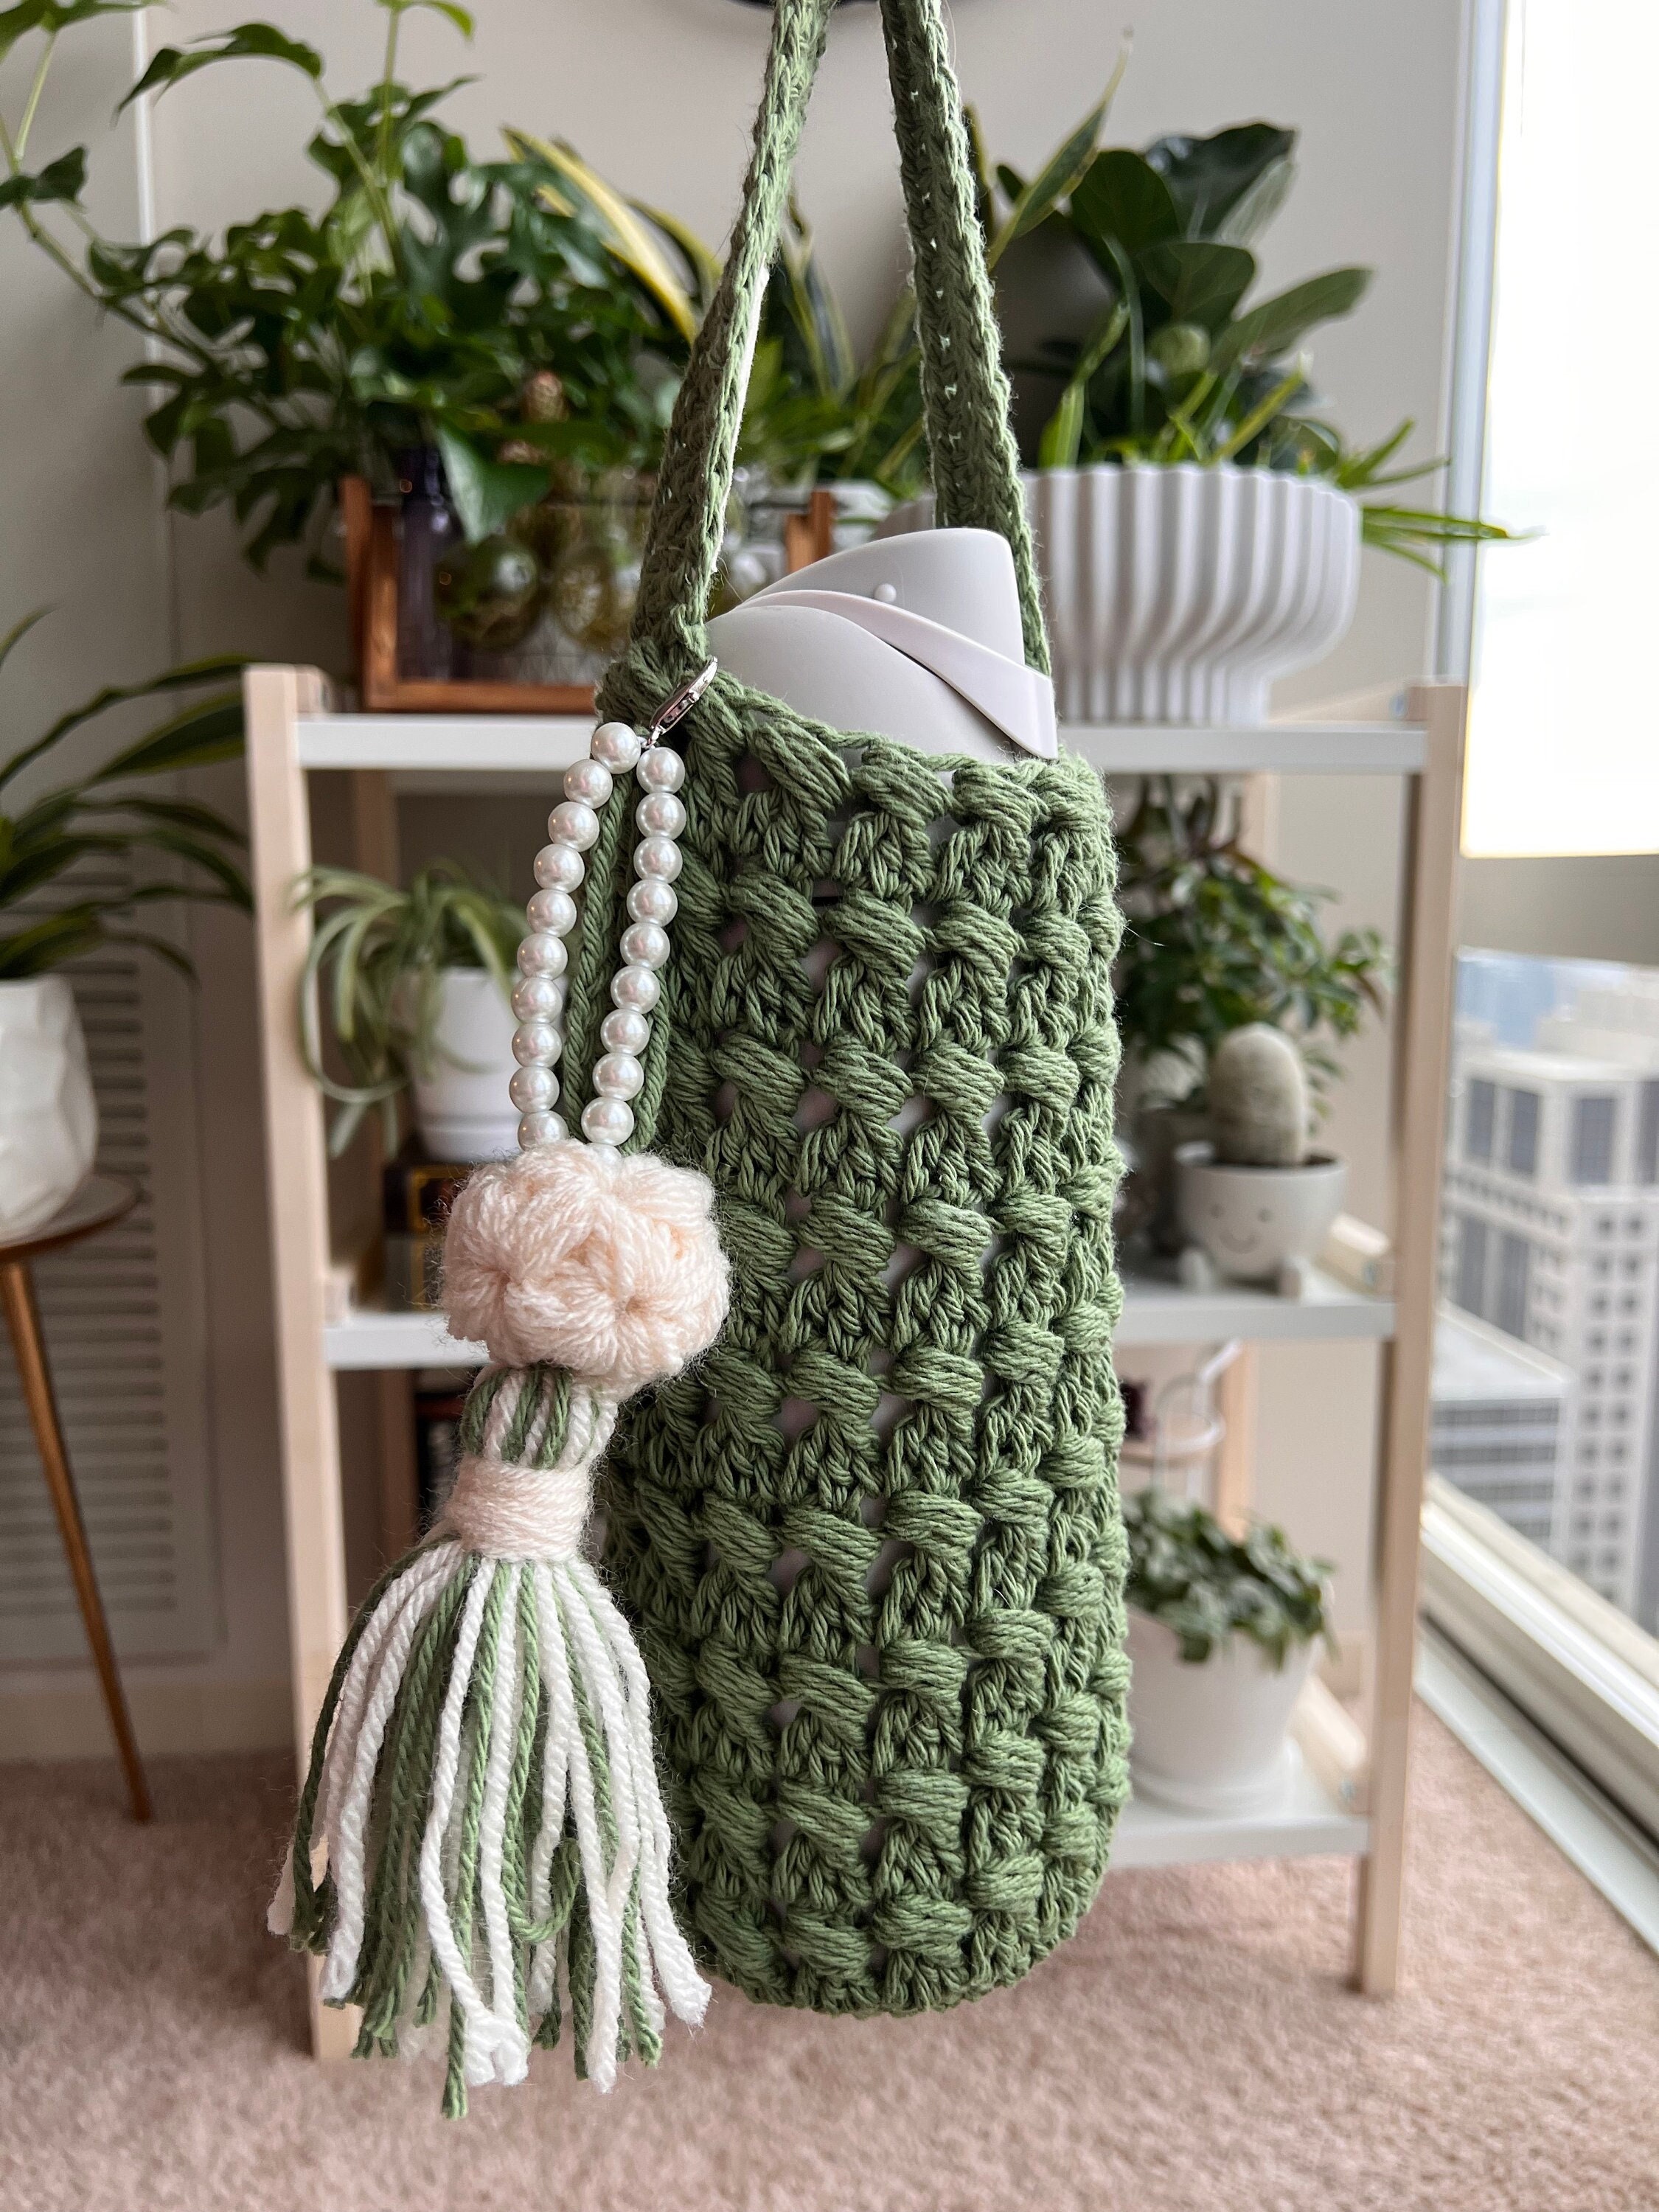 Crochet Water Bottle Carrier, Holder, Thermos Bag, Hydroflask Sling,  Accessory - Yahoo Shopping